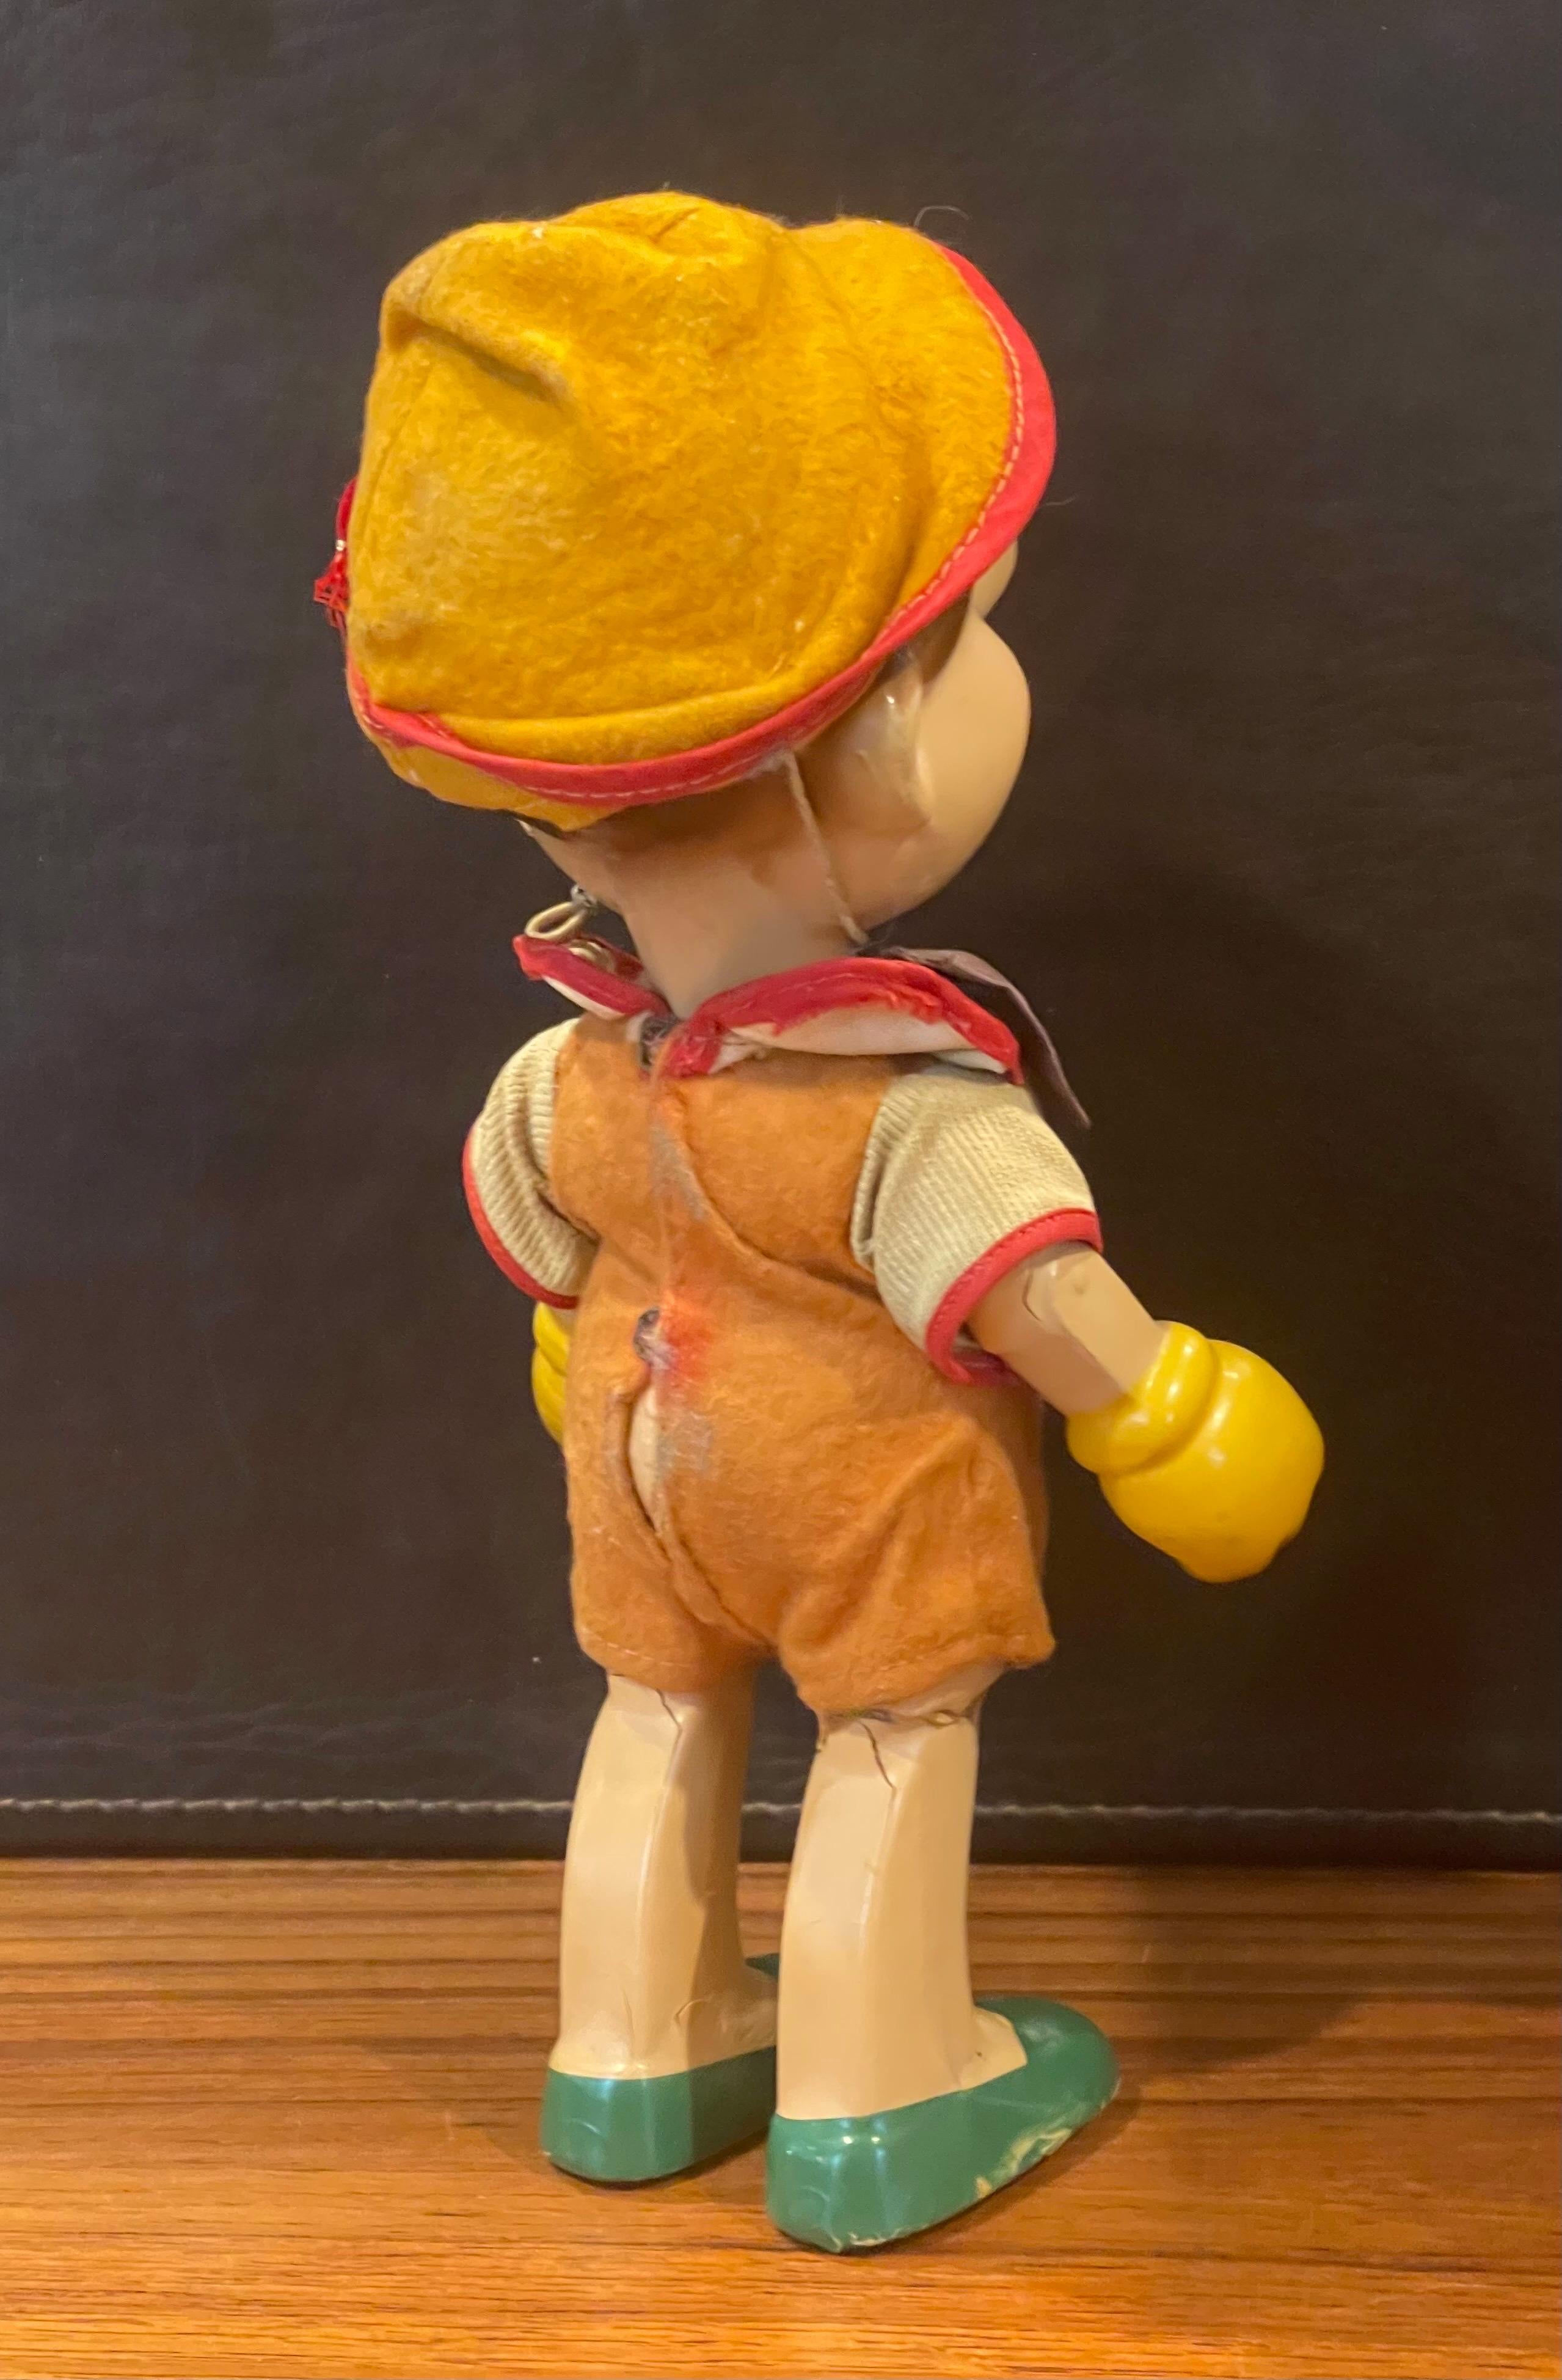 American Antique Pinocchio Doll by Knickerbocker Toy Co. For Sale